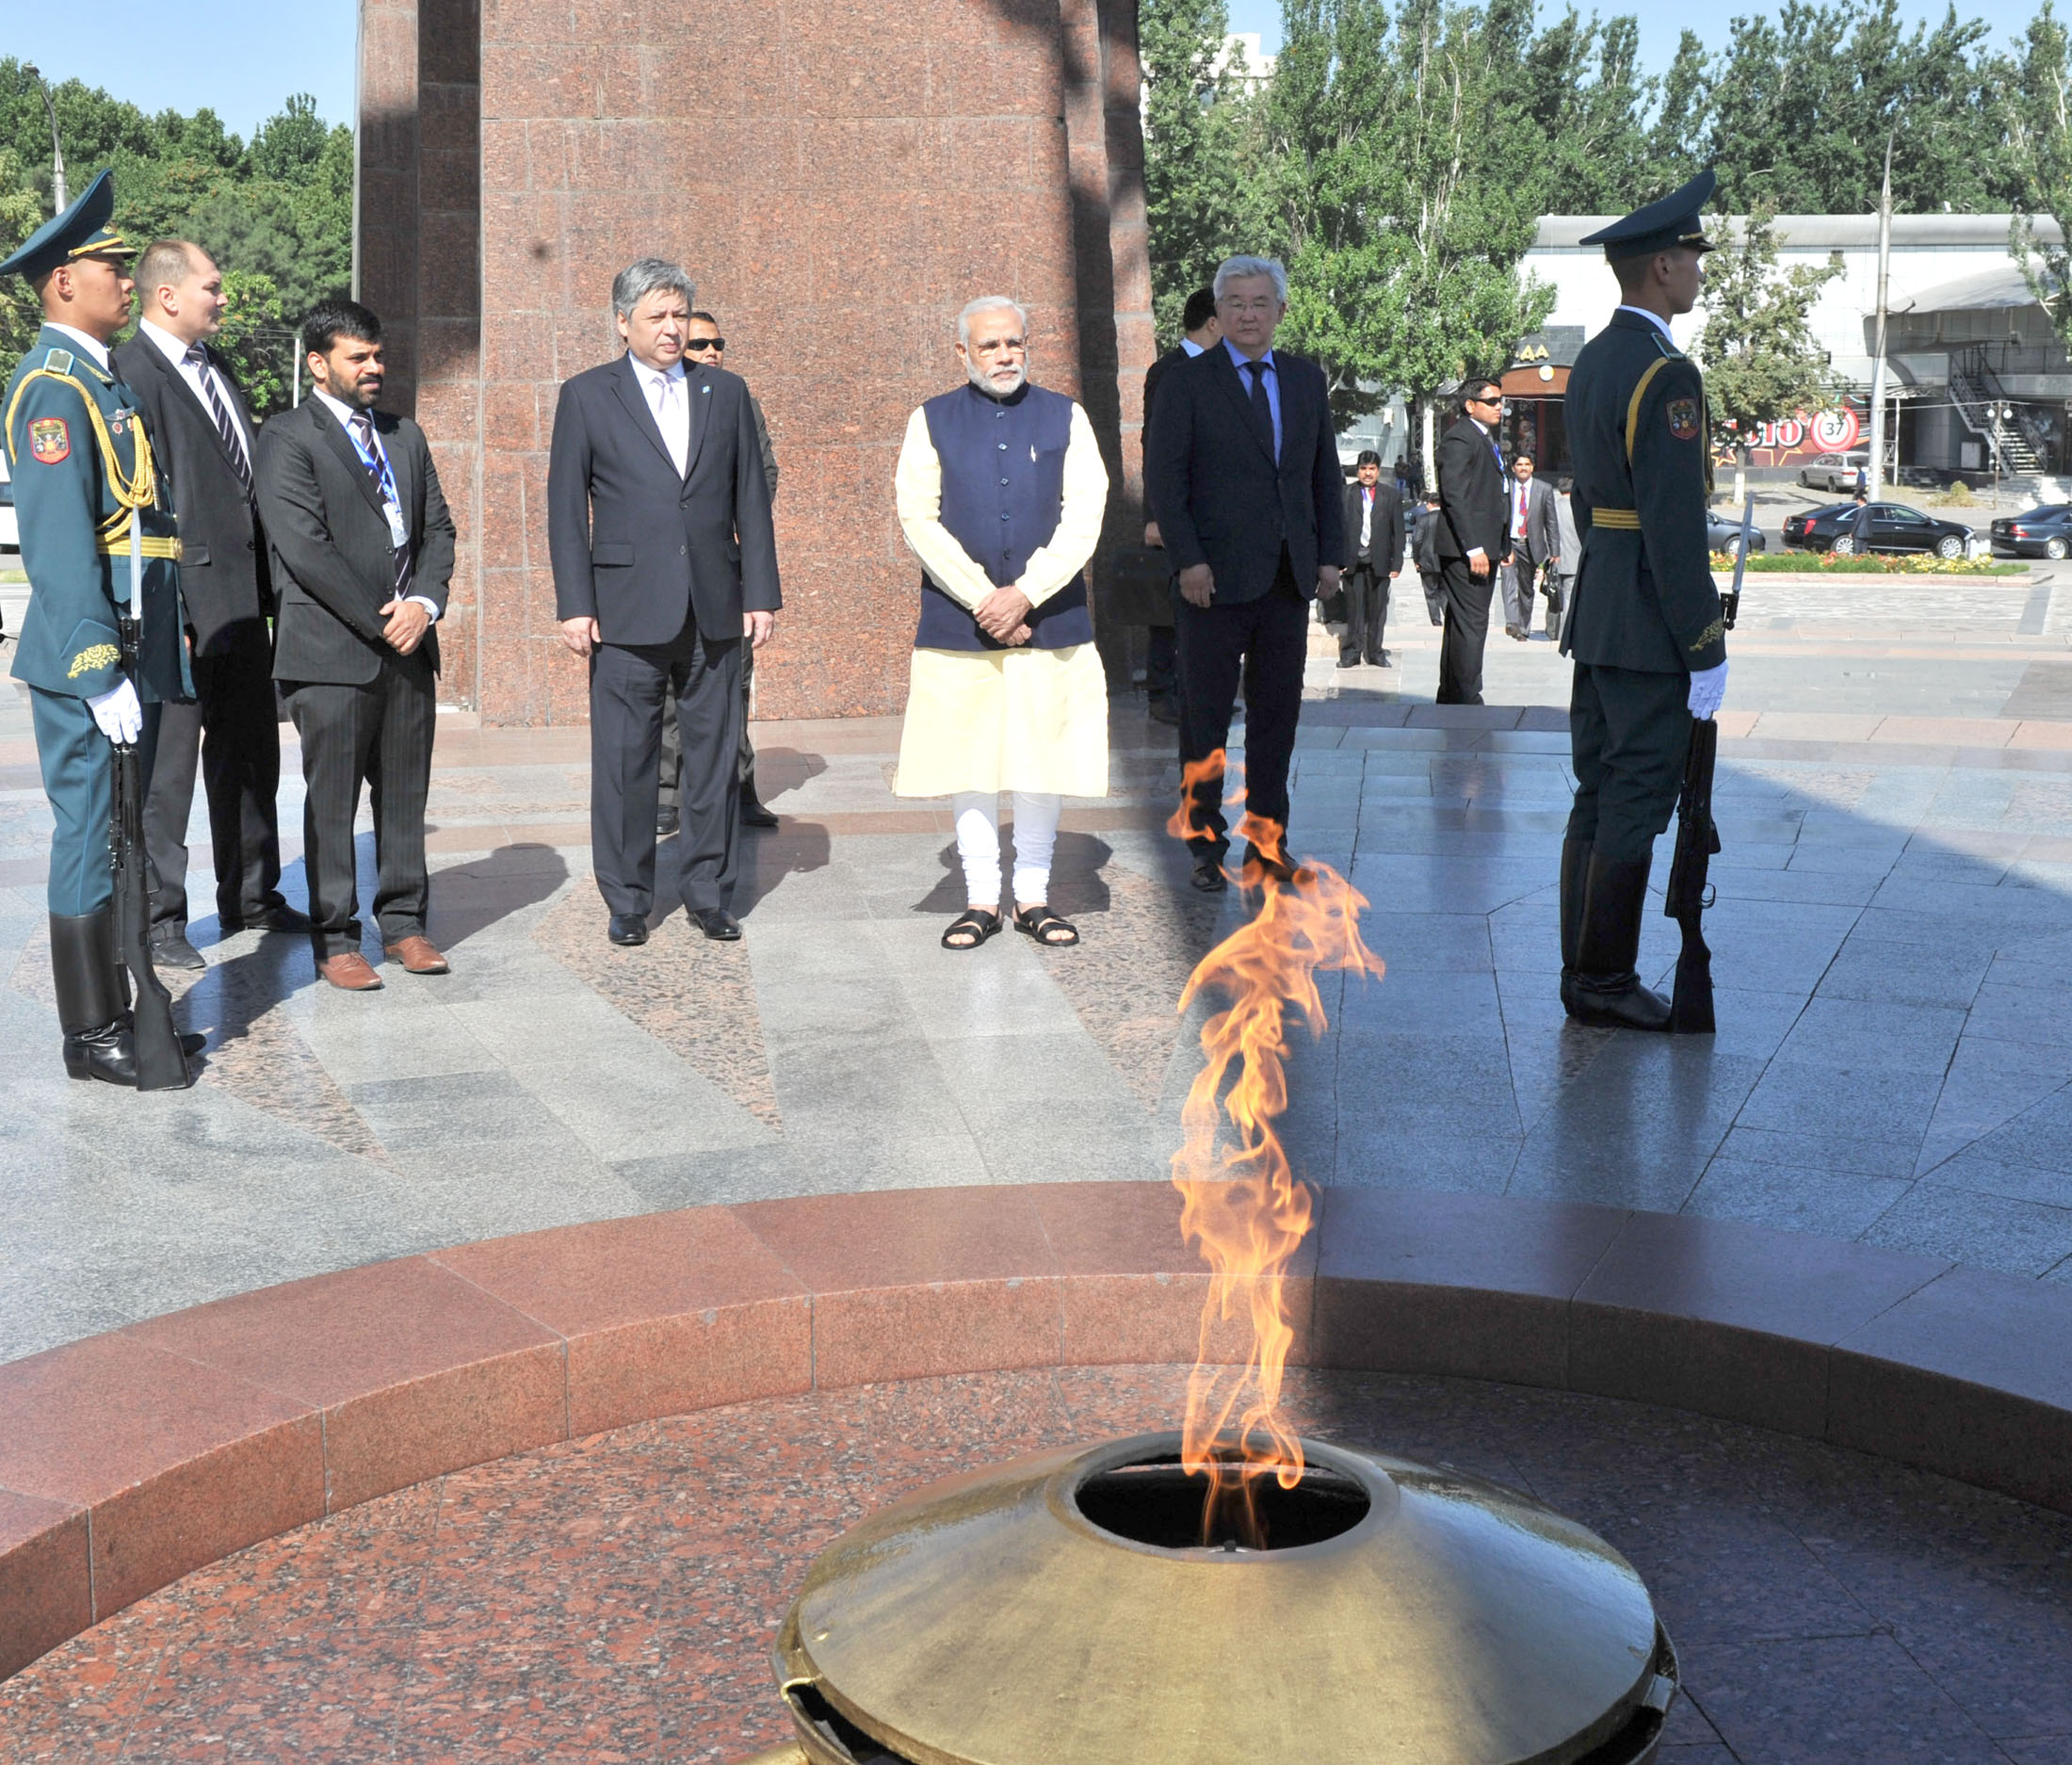 The Prime Minister, Narendra Modi at the Victory Monument, in Victory Square, Bishkek, Kyrgyzstan on July 12, 2015.